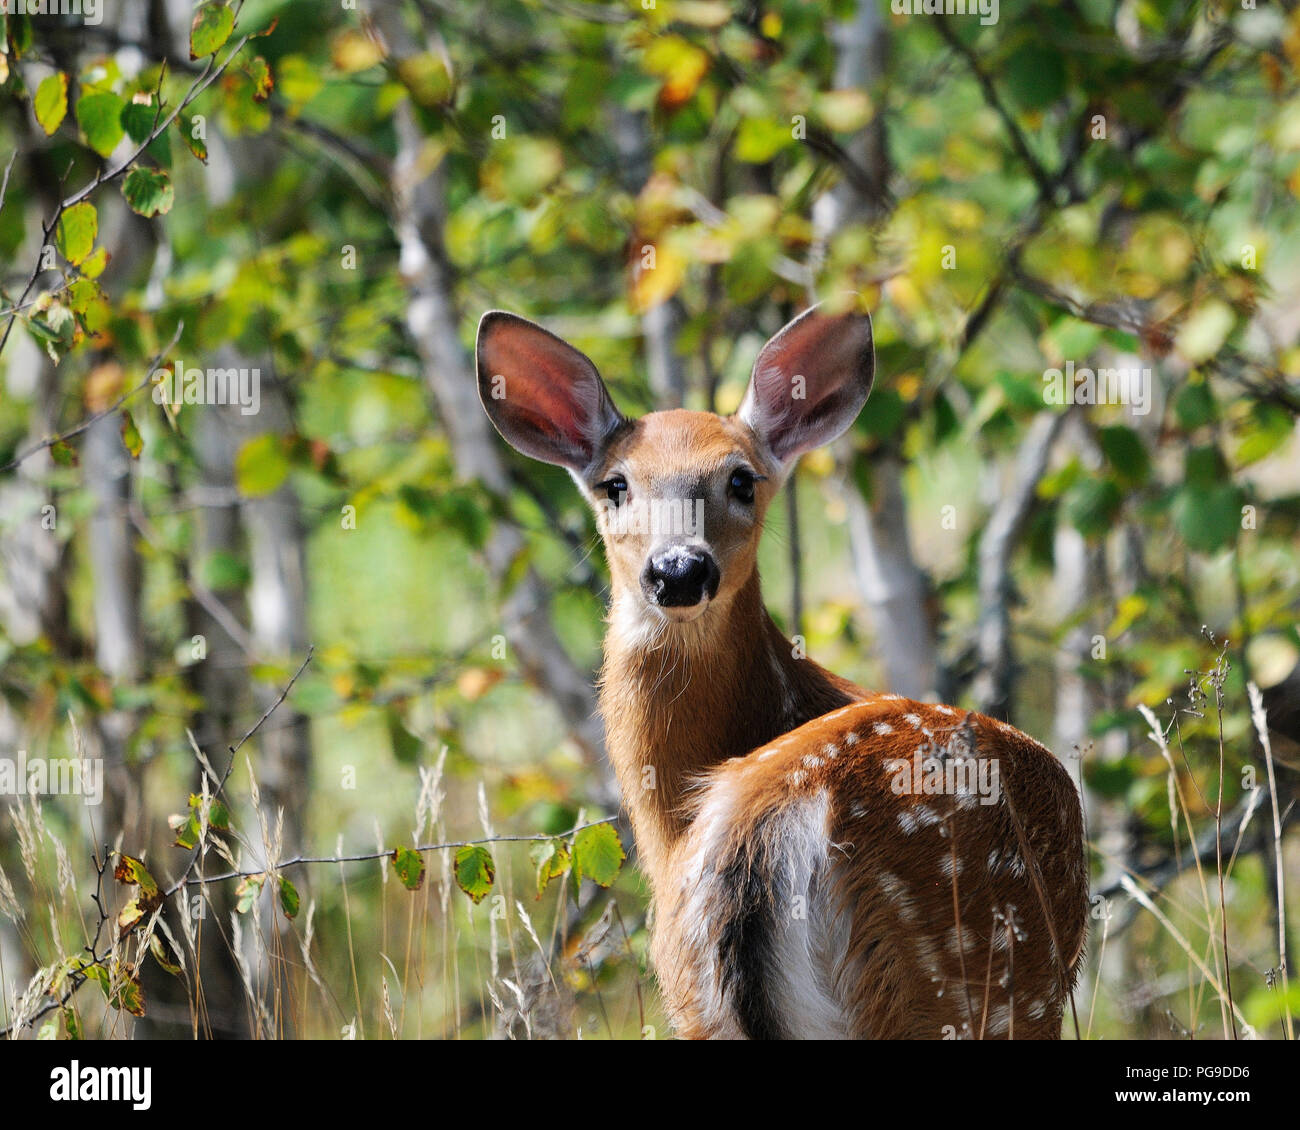 Deer animal close-up view displaying brown reddish fur, head, ears, eyes, nose, with a bokeh foliage background in its environment and surrounding. Stock Photo